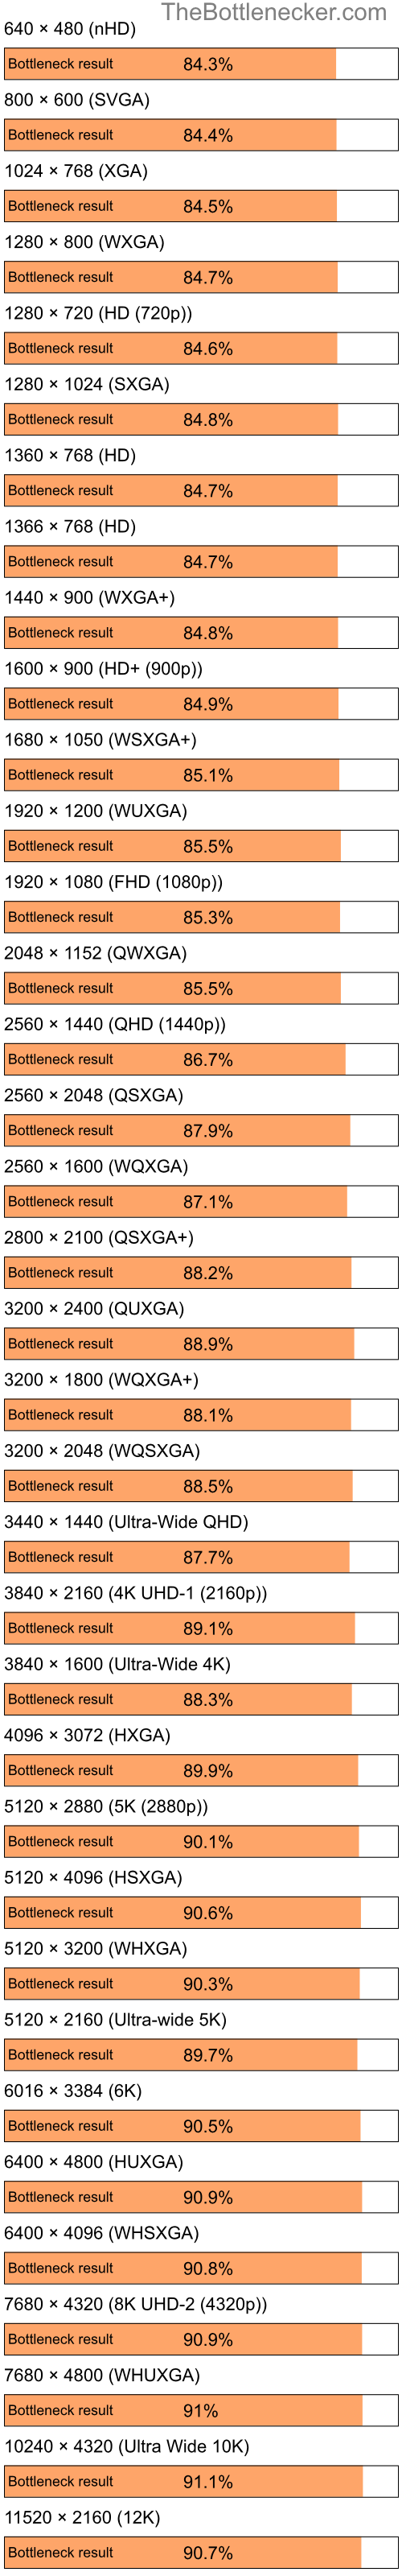 Bottleneck results by resolution for Intel Pentium 4 and NVIDIA GeForce FX 5700LE in Graphic Card Intense Tasks